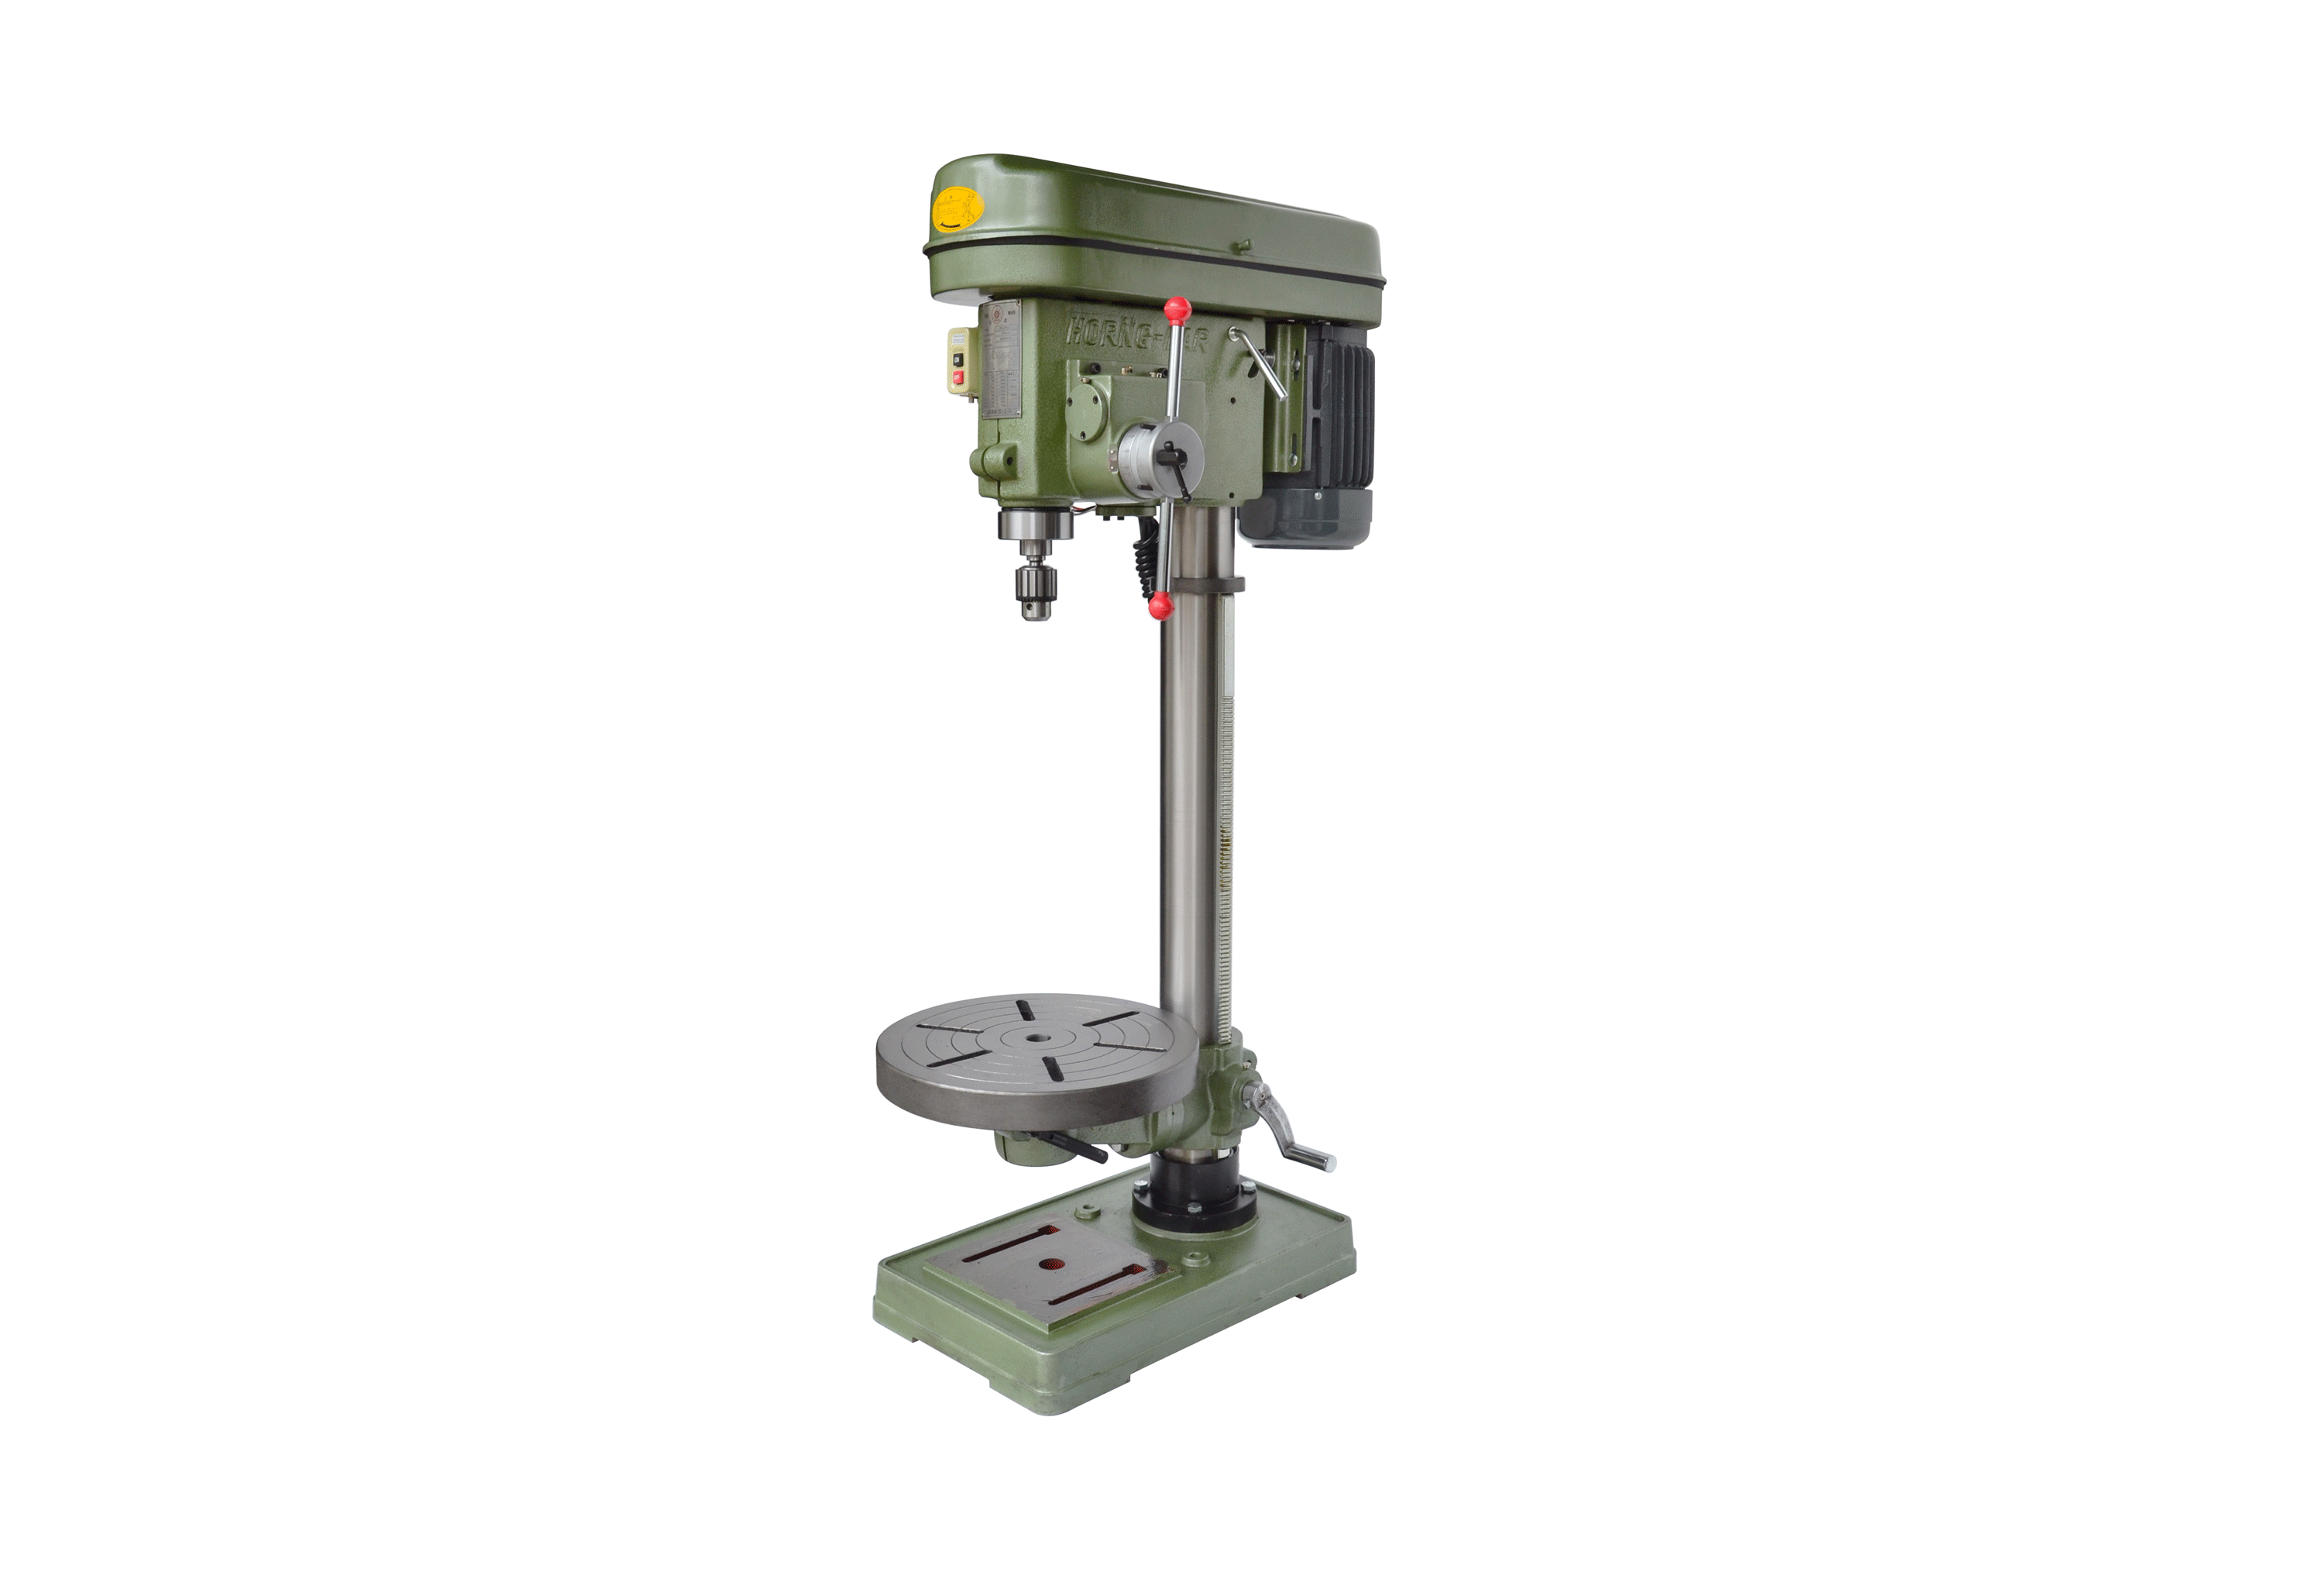 Structure of Bench Drilling Machine and How to Use It Safely